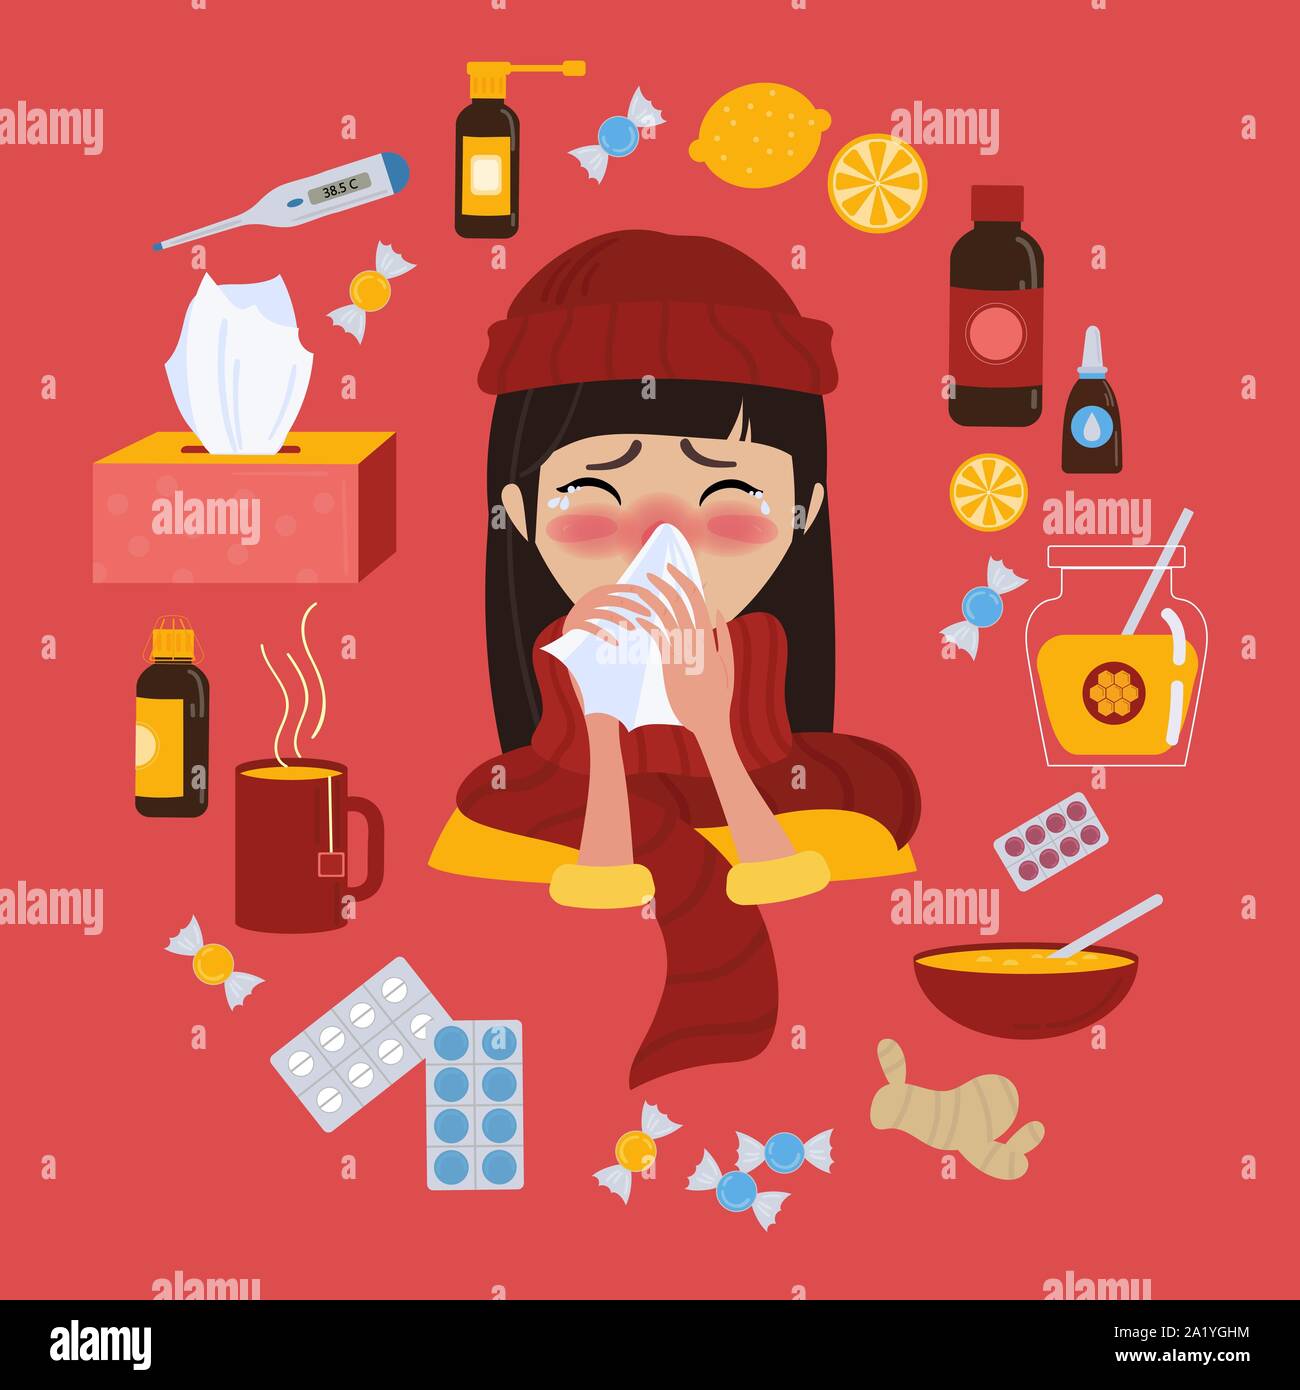 Young girl in red hat caught cold flu or virus. Stock Vector